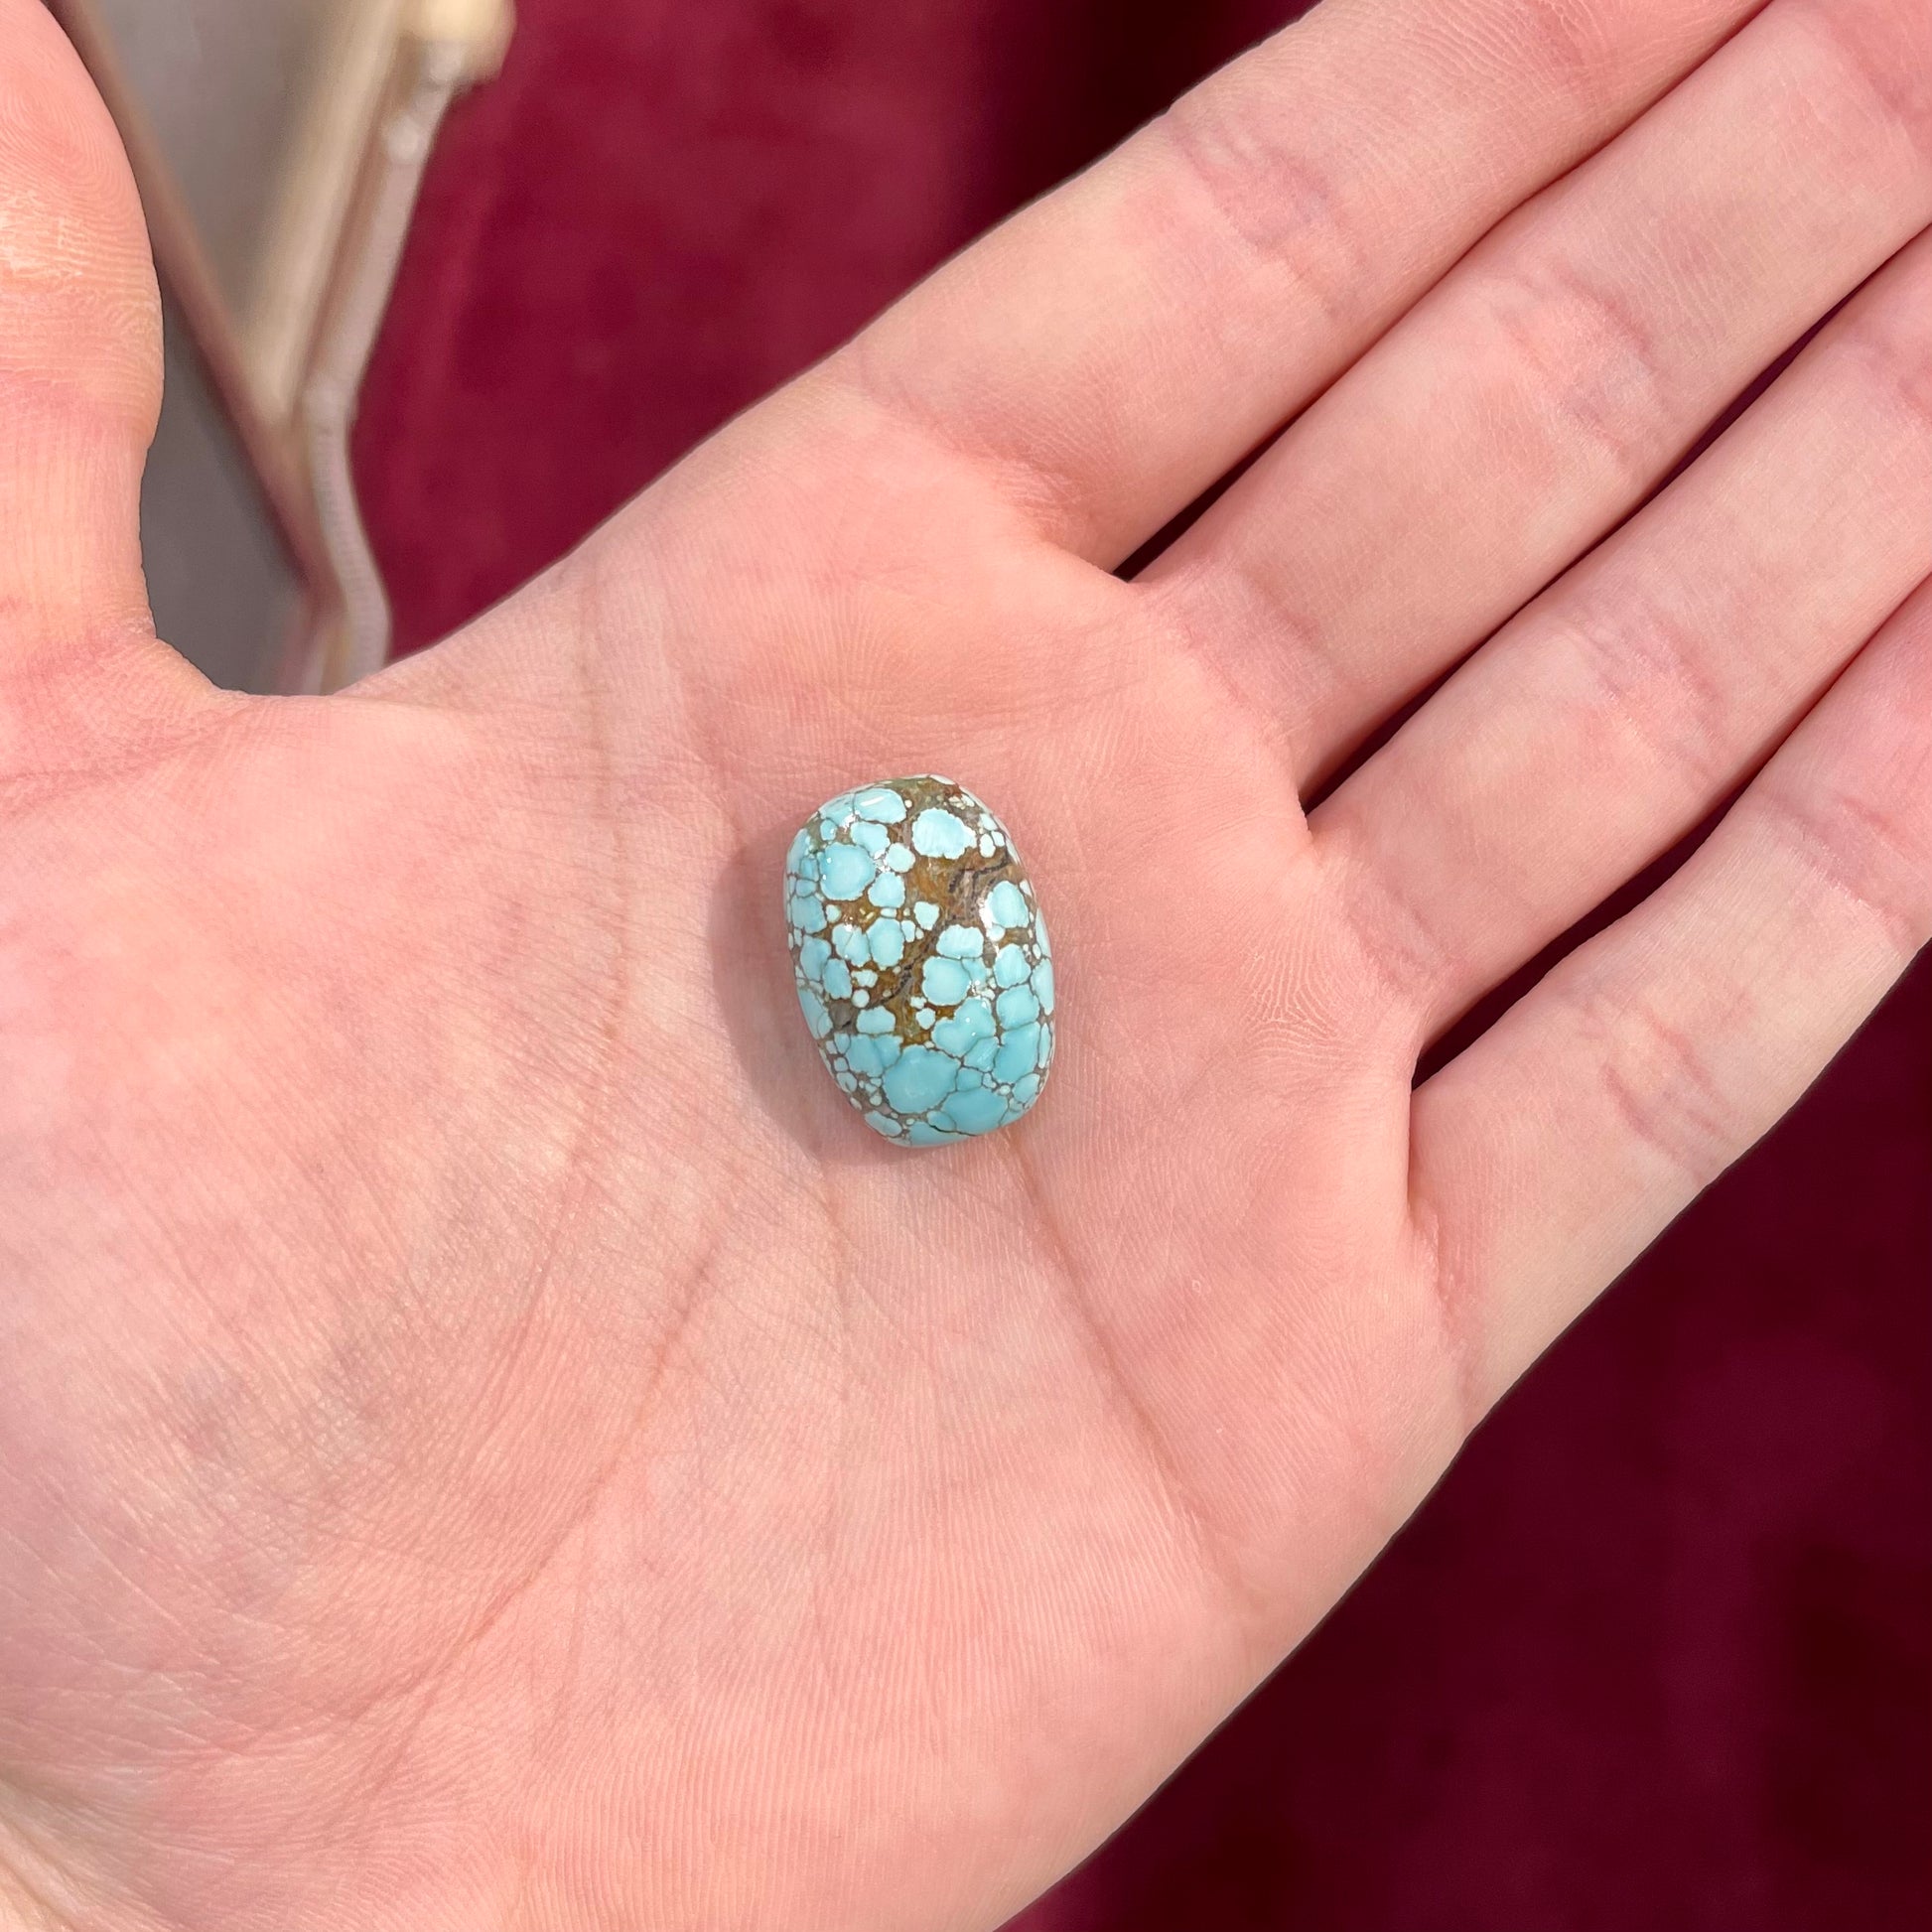 A loose spiderweb turquoise stone from Number 8 Mine, Nevada.